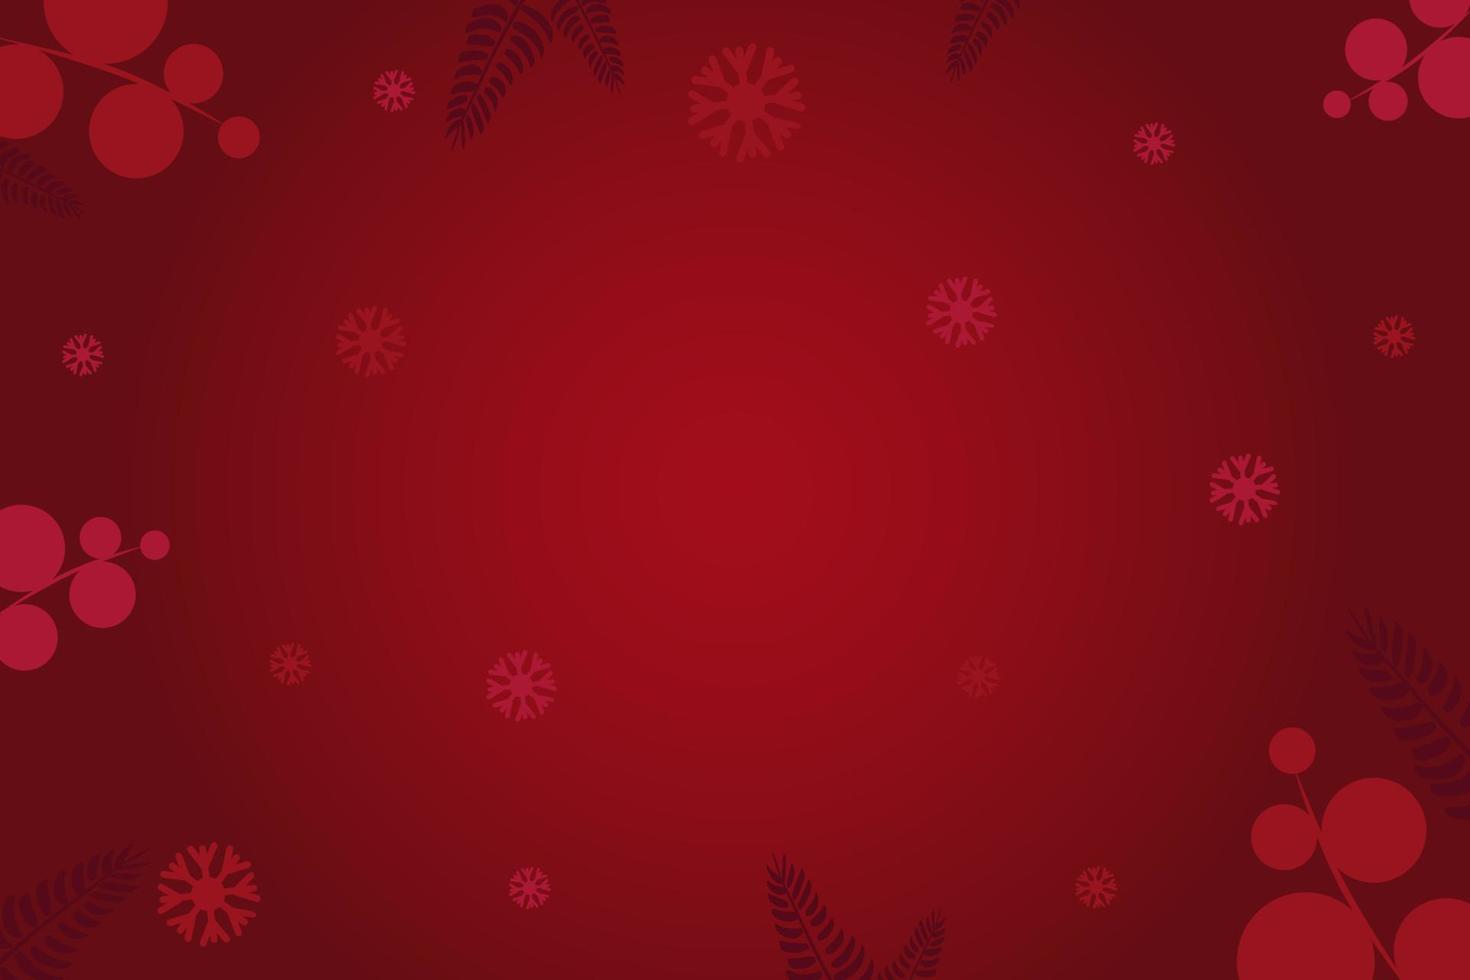 Dark red New Year and Christmas 2023 backgrounds for greeting cards or invitations with unobtrusive patterns. Vector for designs without text. EPS10